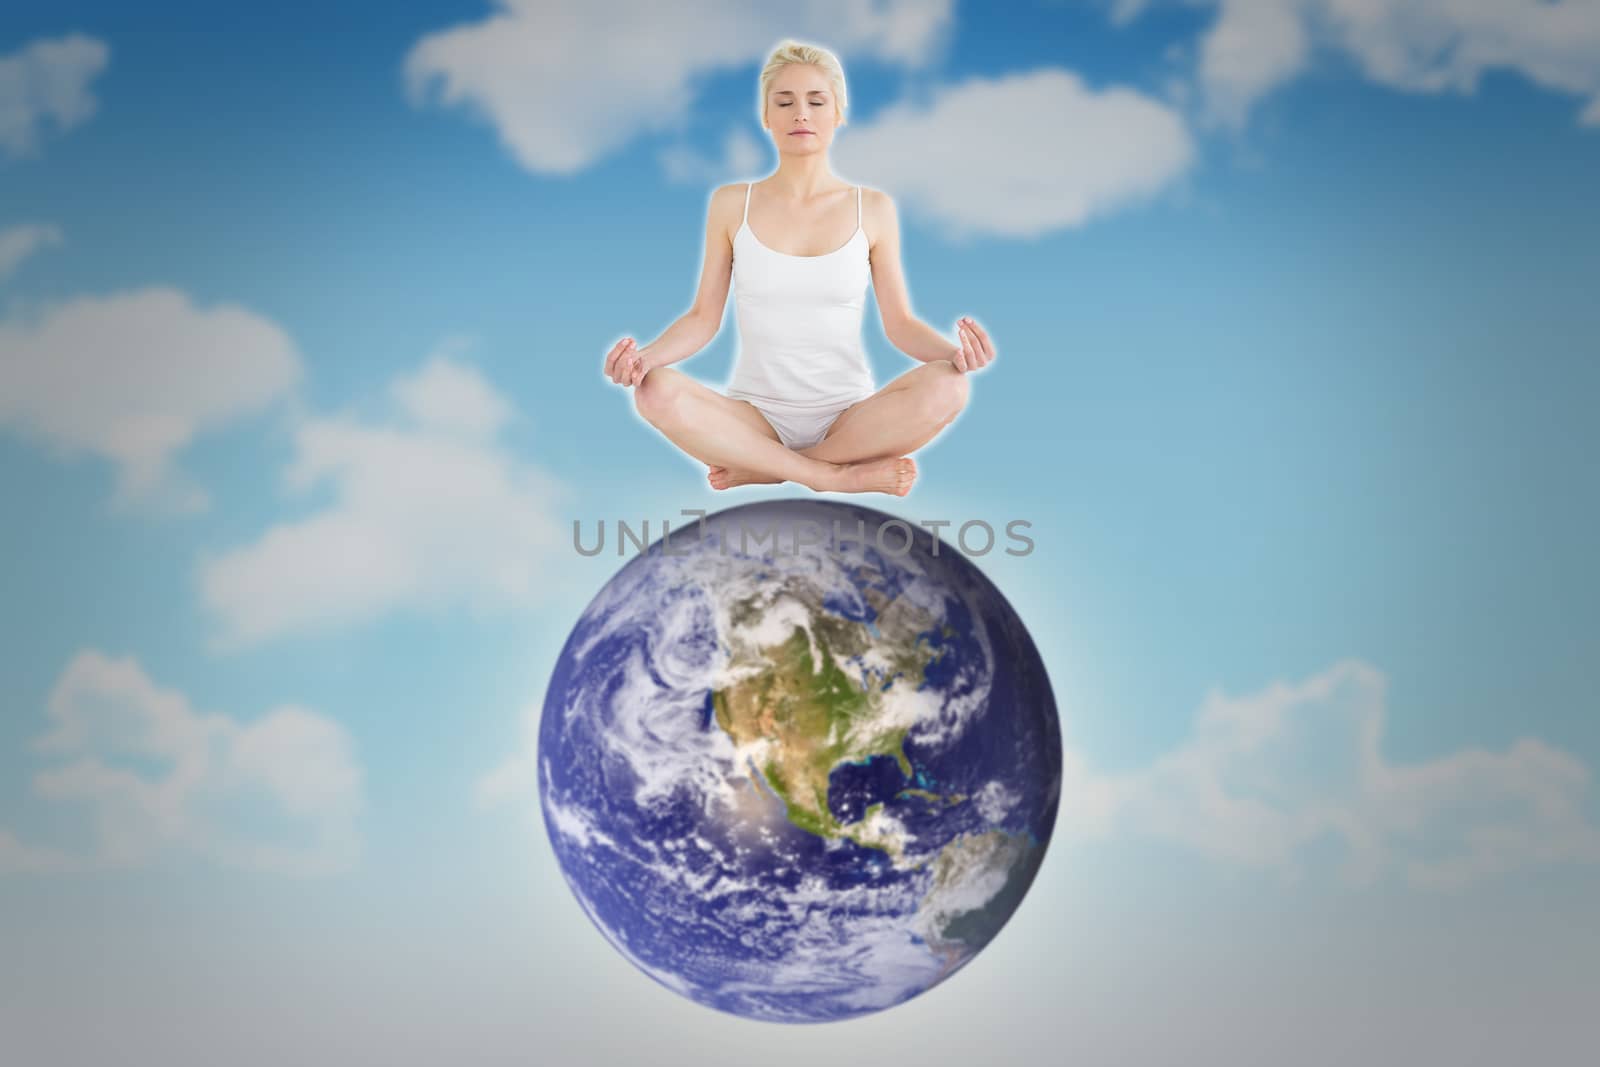 Toned young woman sitting in lotus pose with eyes closed against blue sky